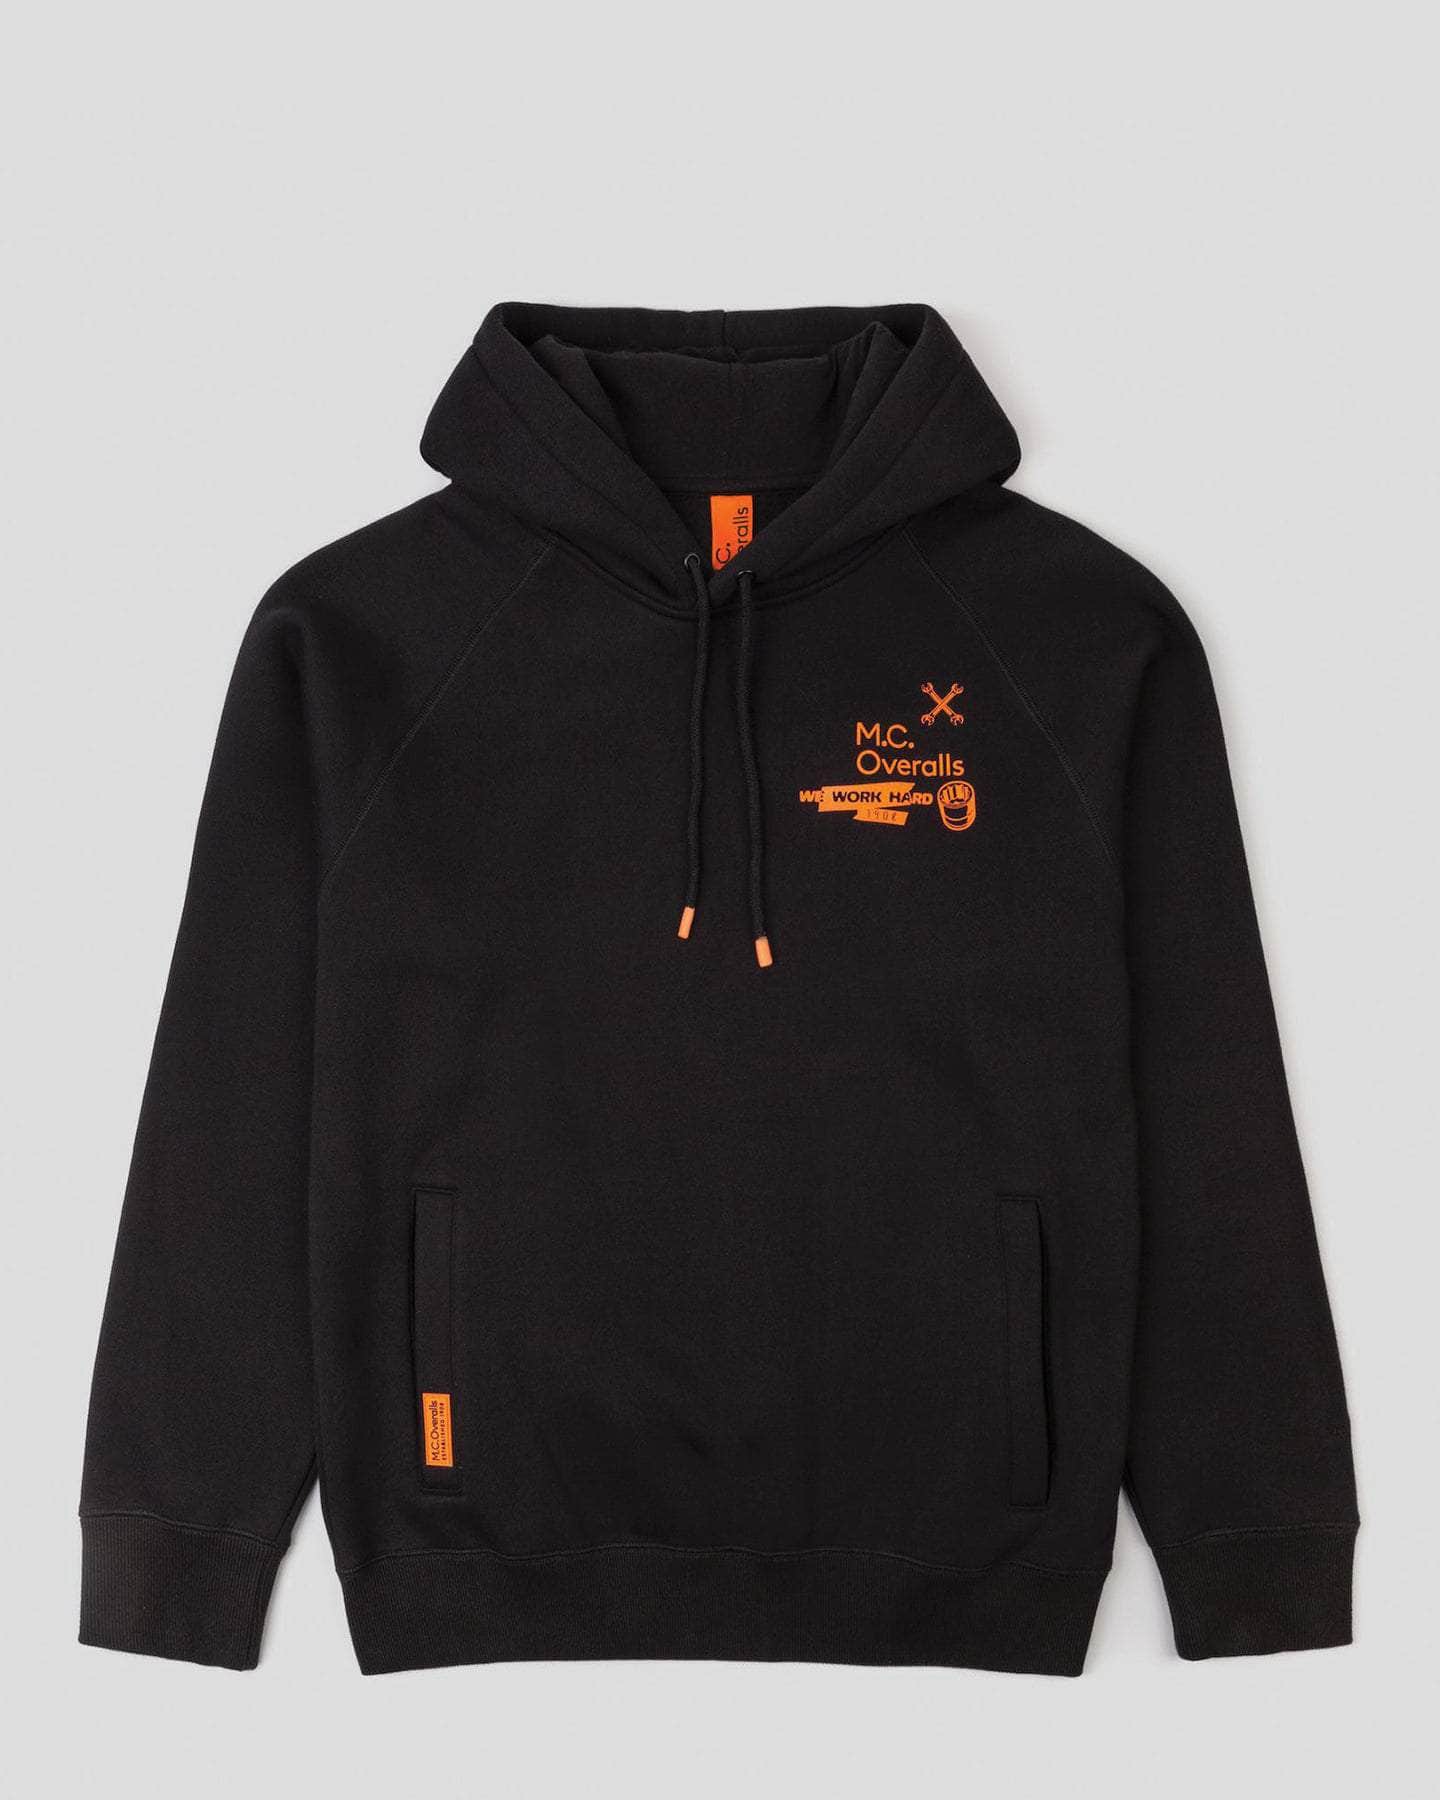 Tools- Wrench &amp; Bolts Hoodie Black